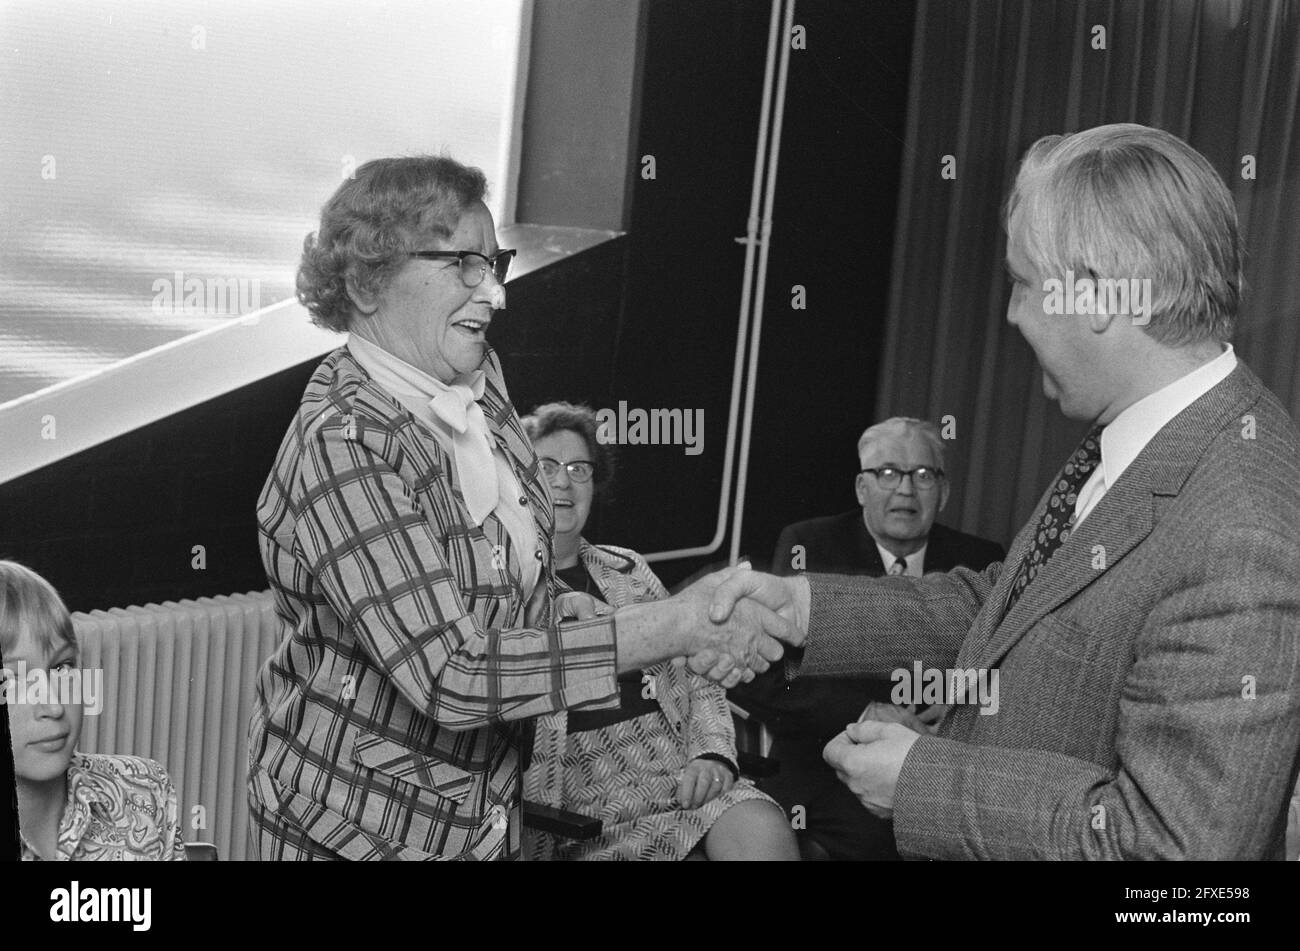 Aunt Mart Stroop, who helped Jews during the war, honored in Jewish Cultural Center in Amsterdam, September 25, 1973, tributes, The Netherlands, 20th century press agency photo, news to remember, documentary, historic photography 1945-1990, visual stories, human history of the Twentieth Century, capturing moments in time Stock Photo